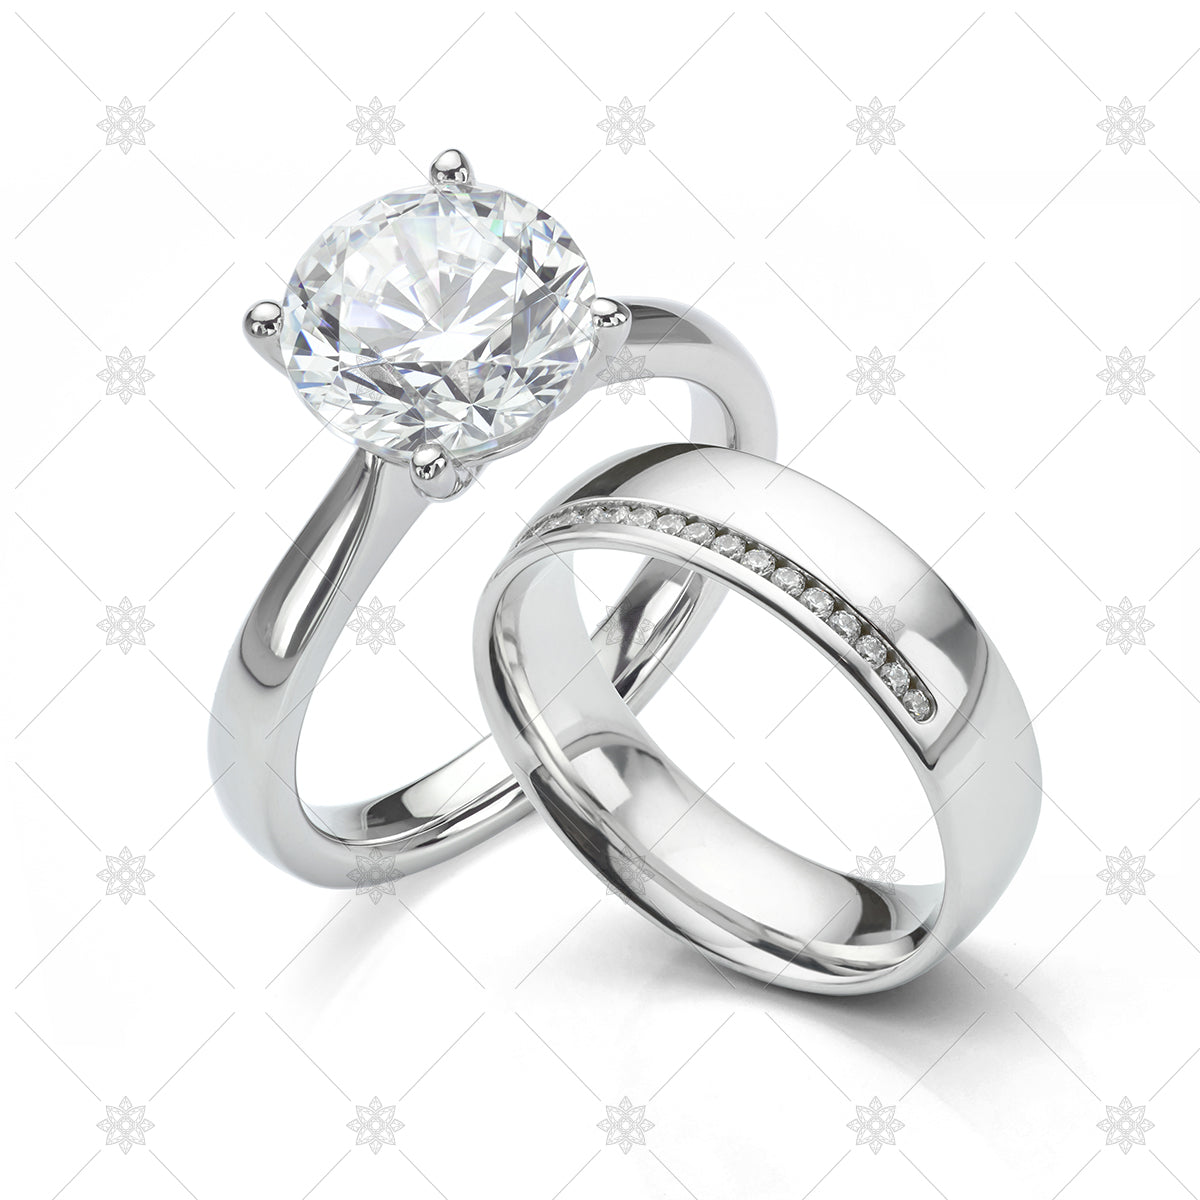 Solitaire engagement ring and wedding band stock image